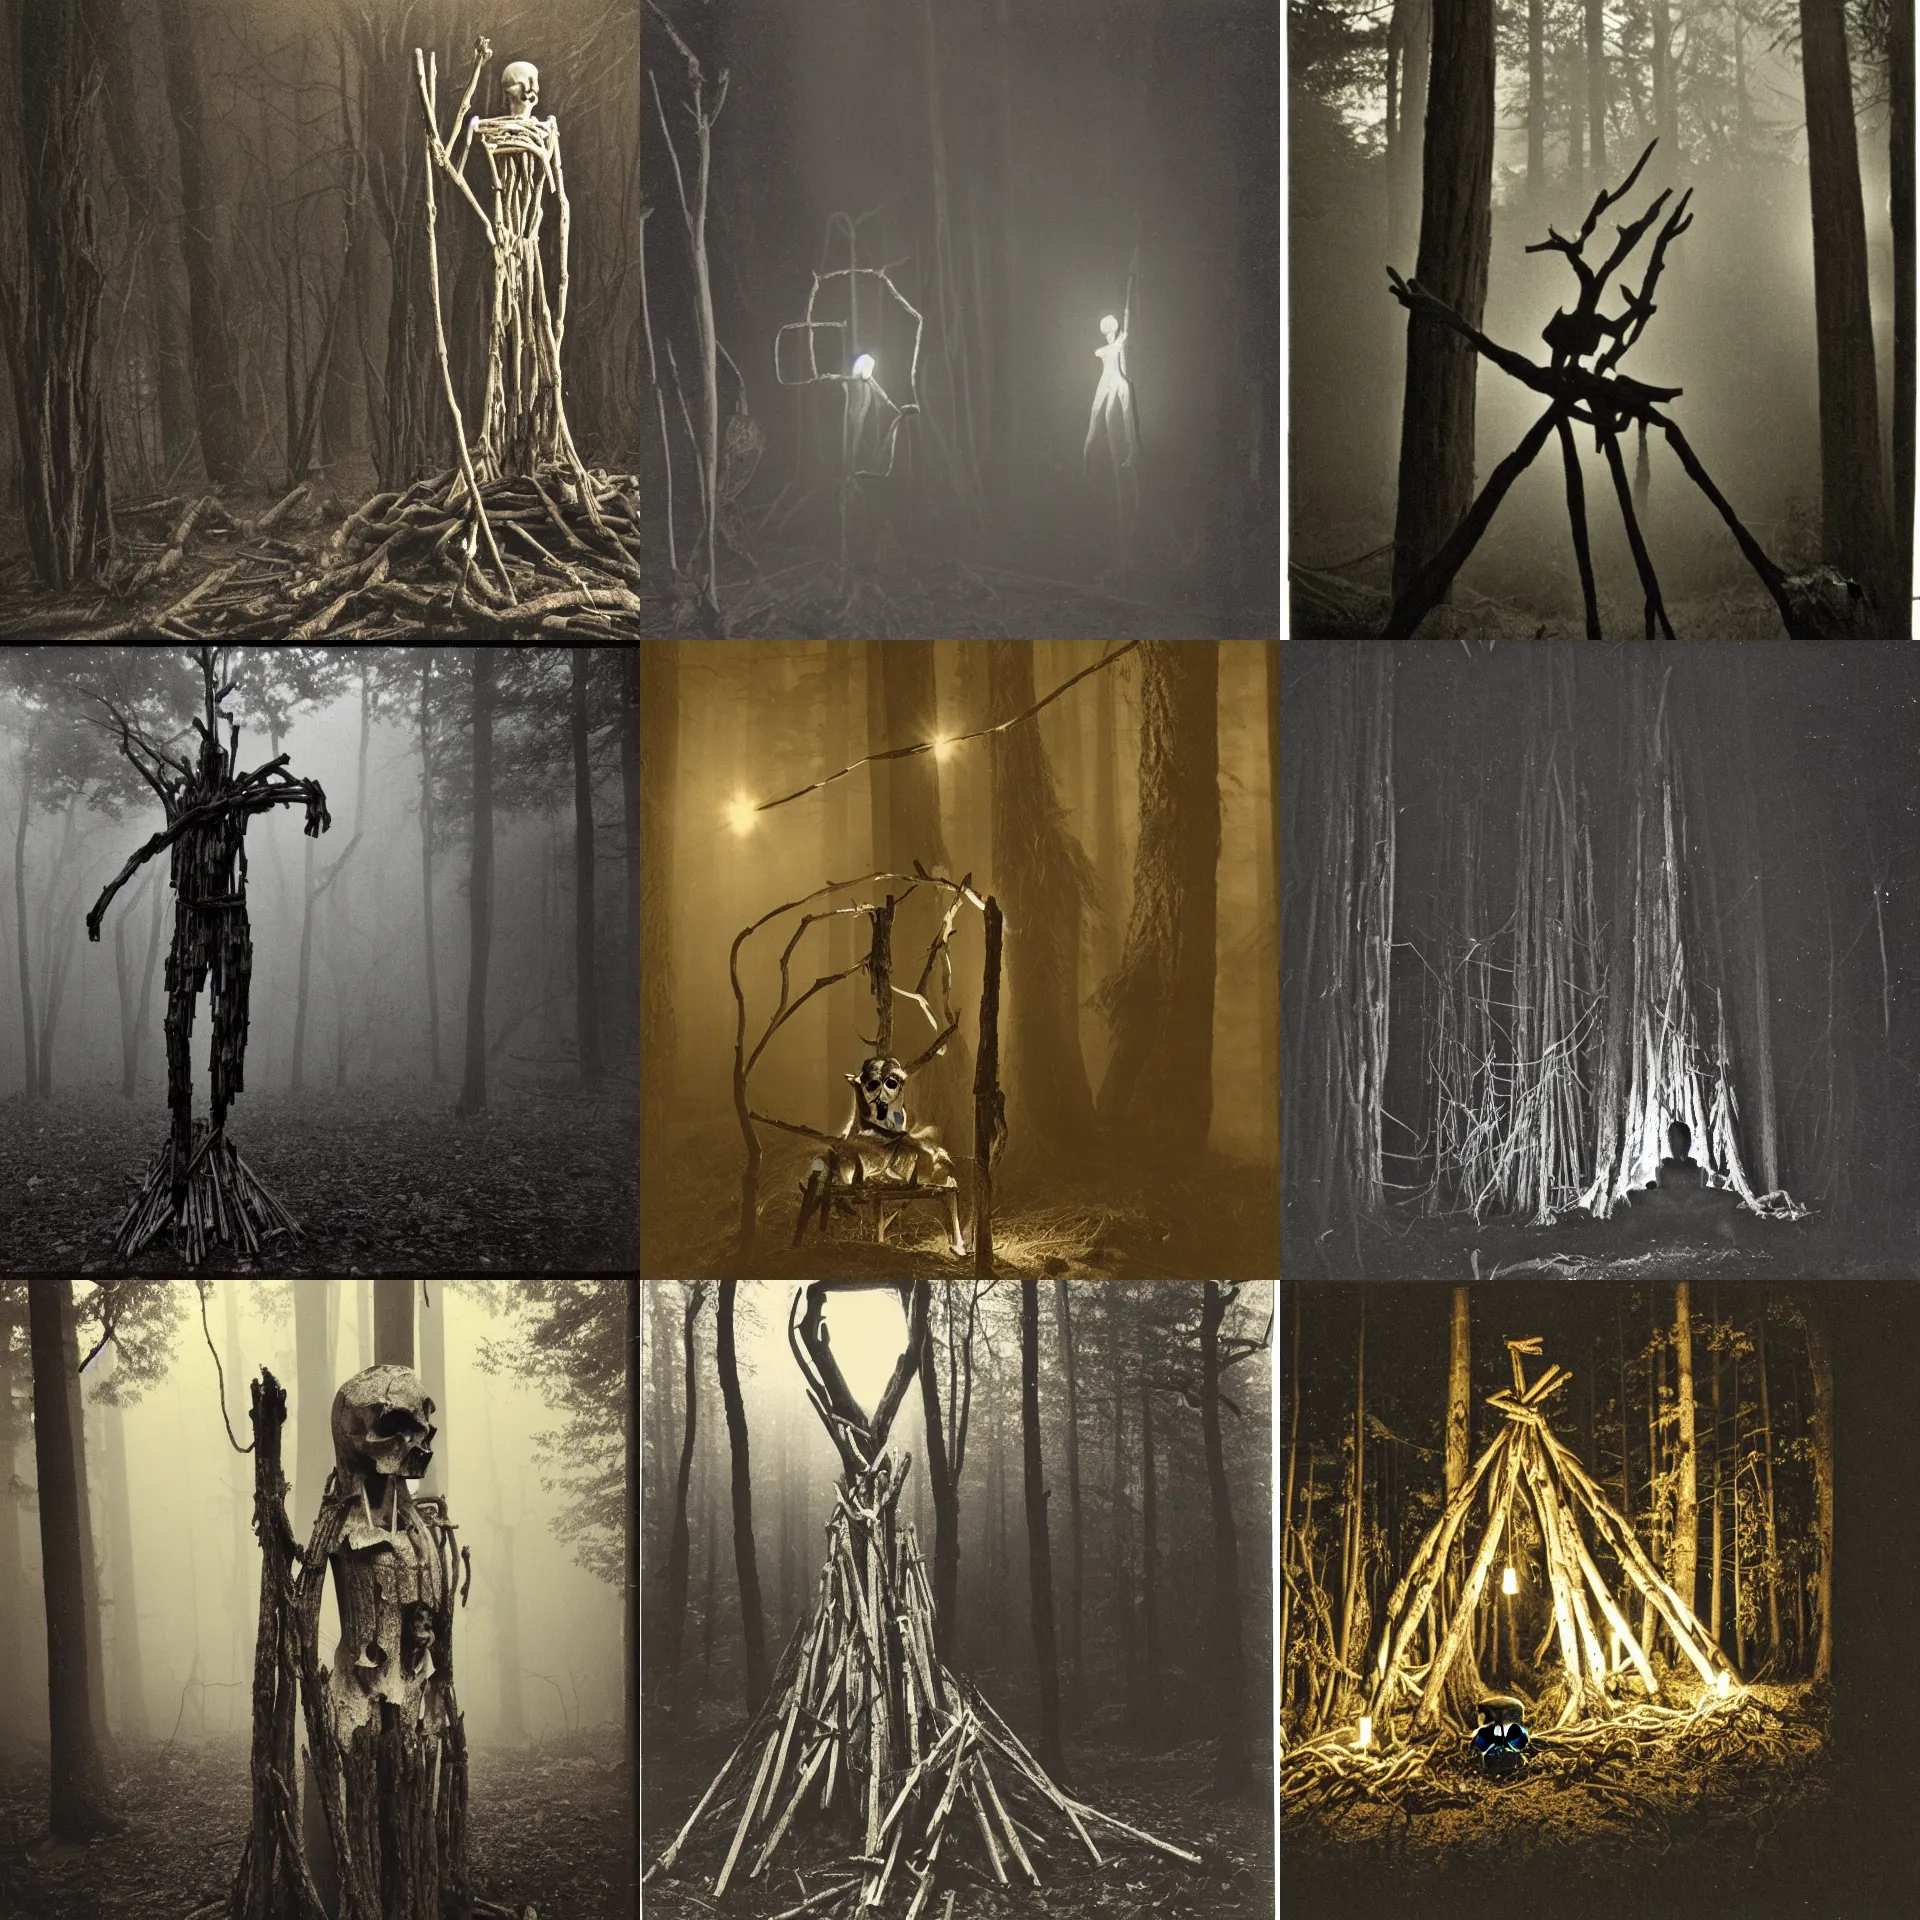 Prompt: a vintage photograph of a crude idol in a dark misty forest made from sticks, bone and twine and a skull at night, illuminated by a flashlight beam